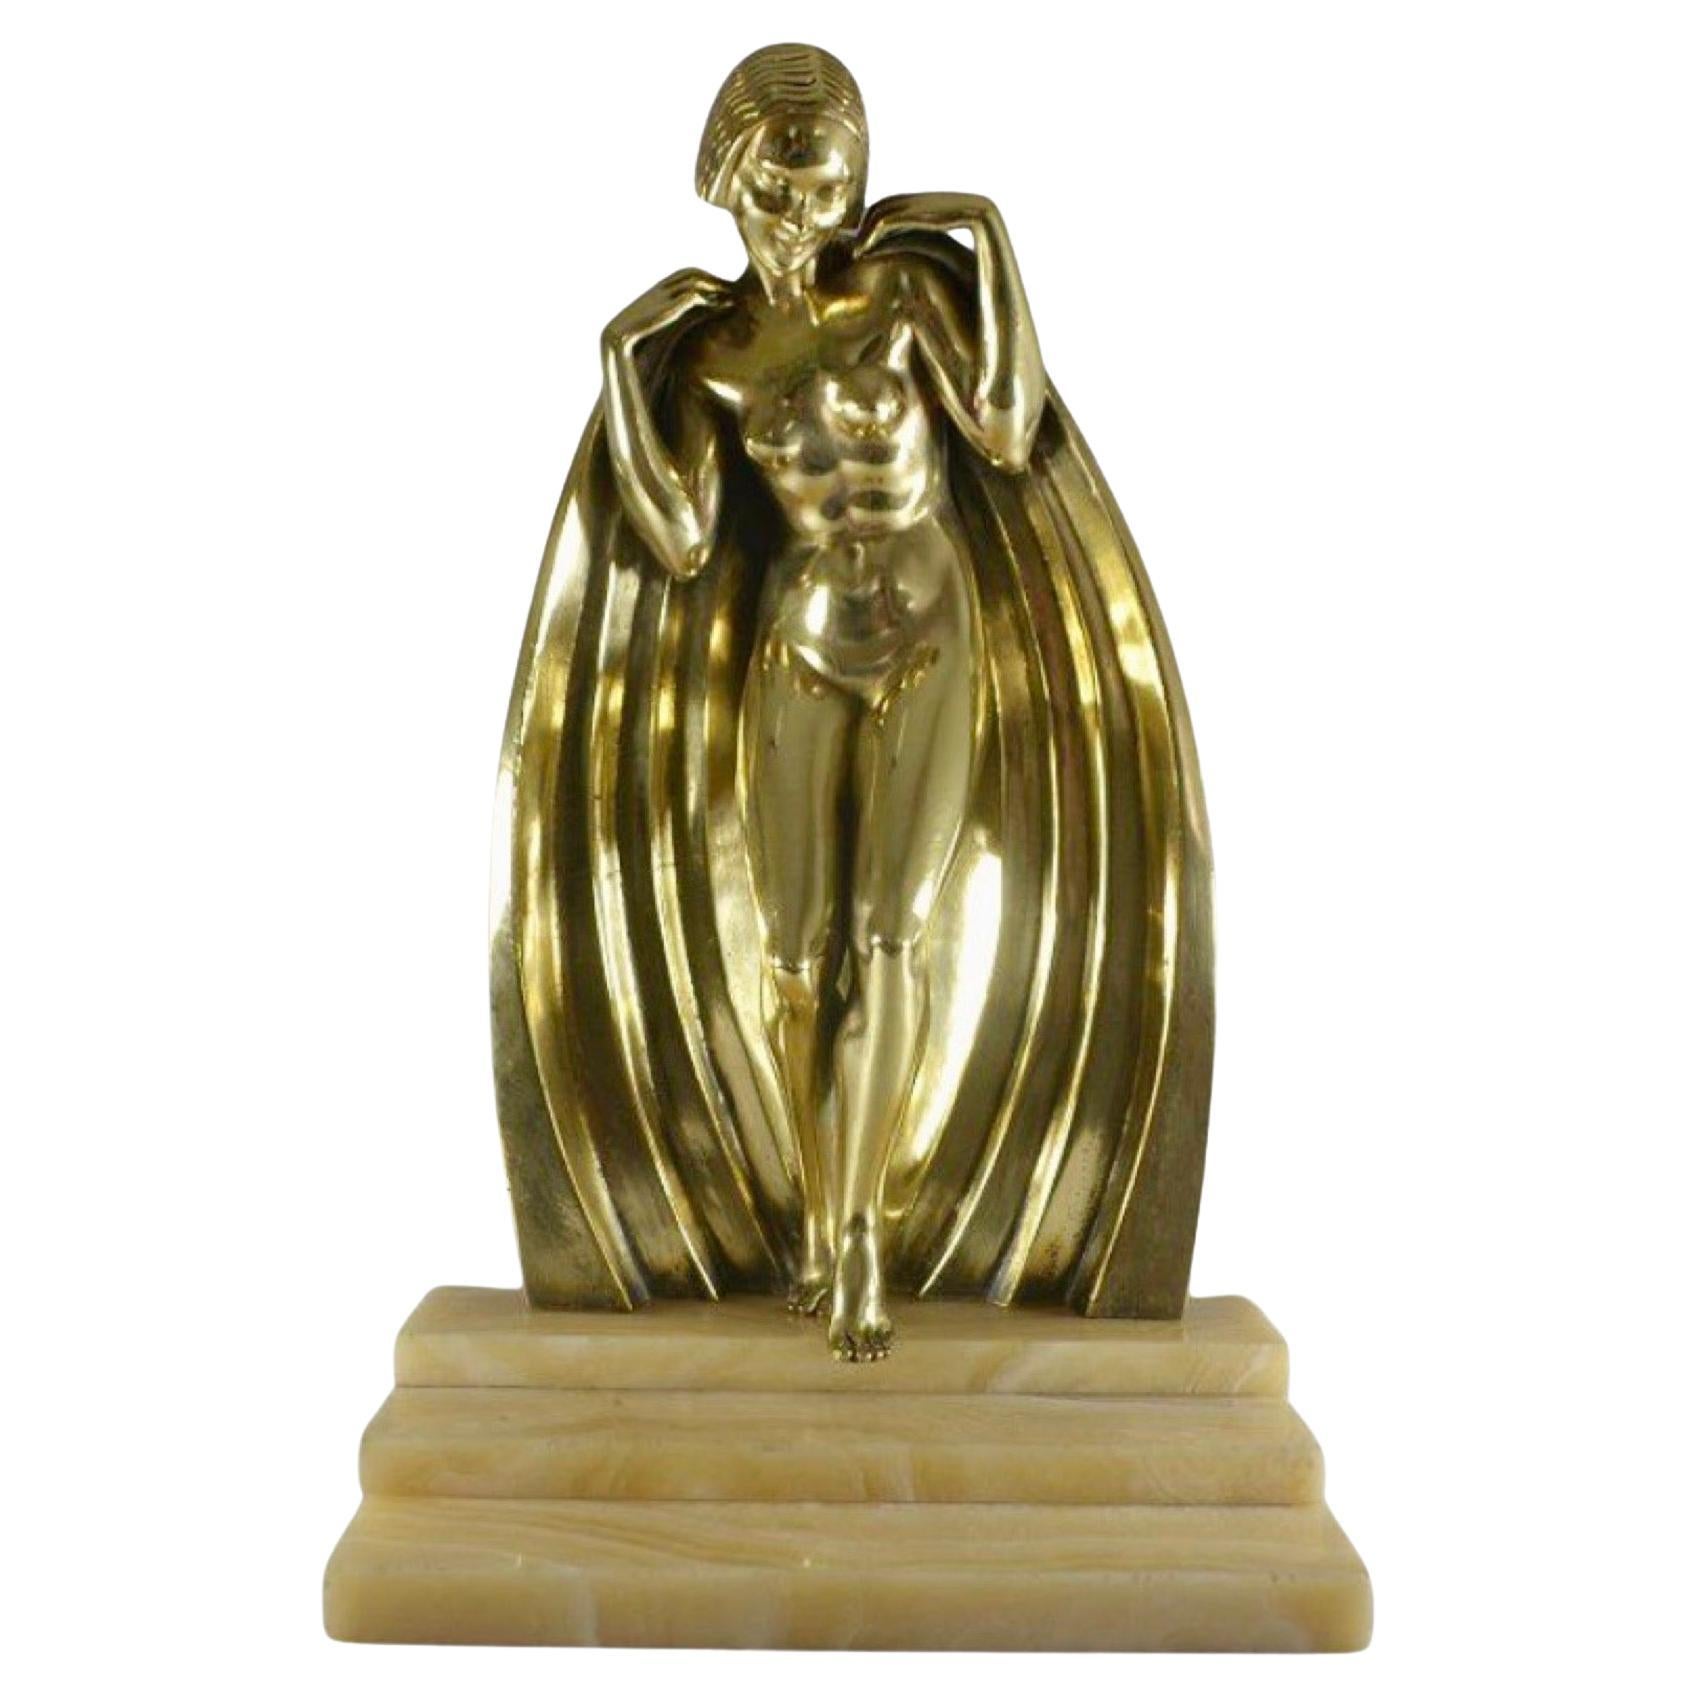 Raymonde Guerbe Rare Art Deco Bronze Sculpture Lady with Cape Guillemard Edition